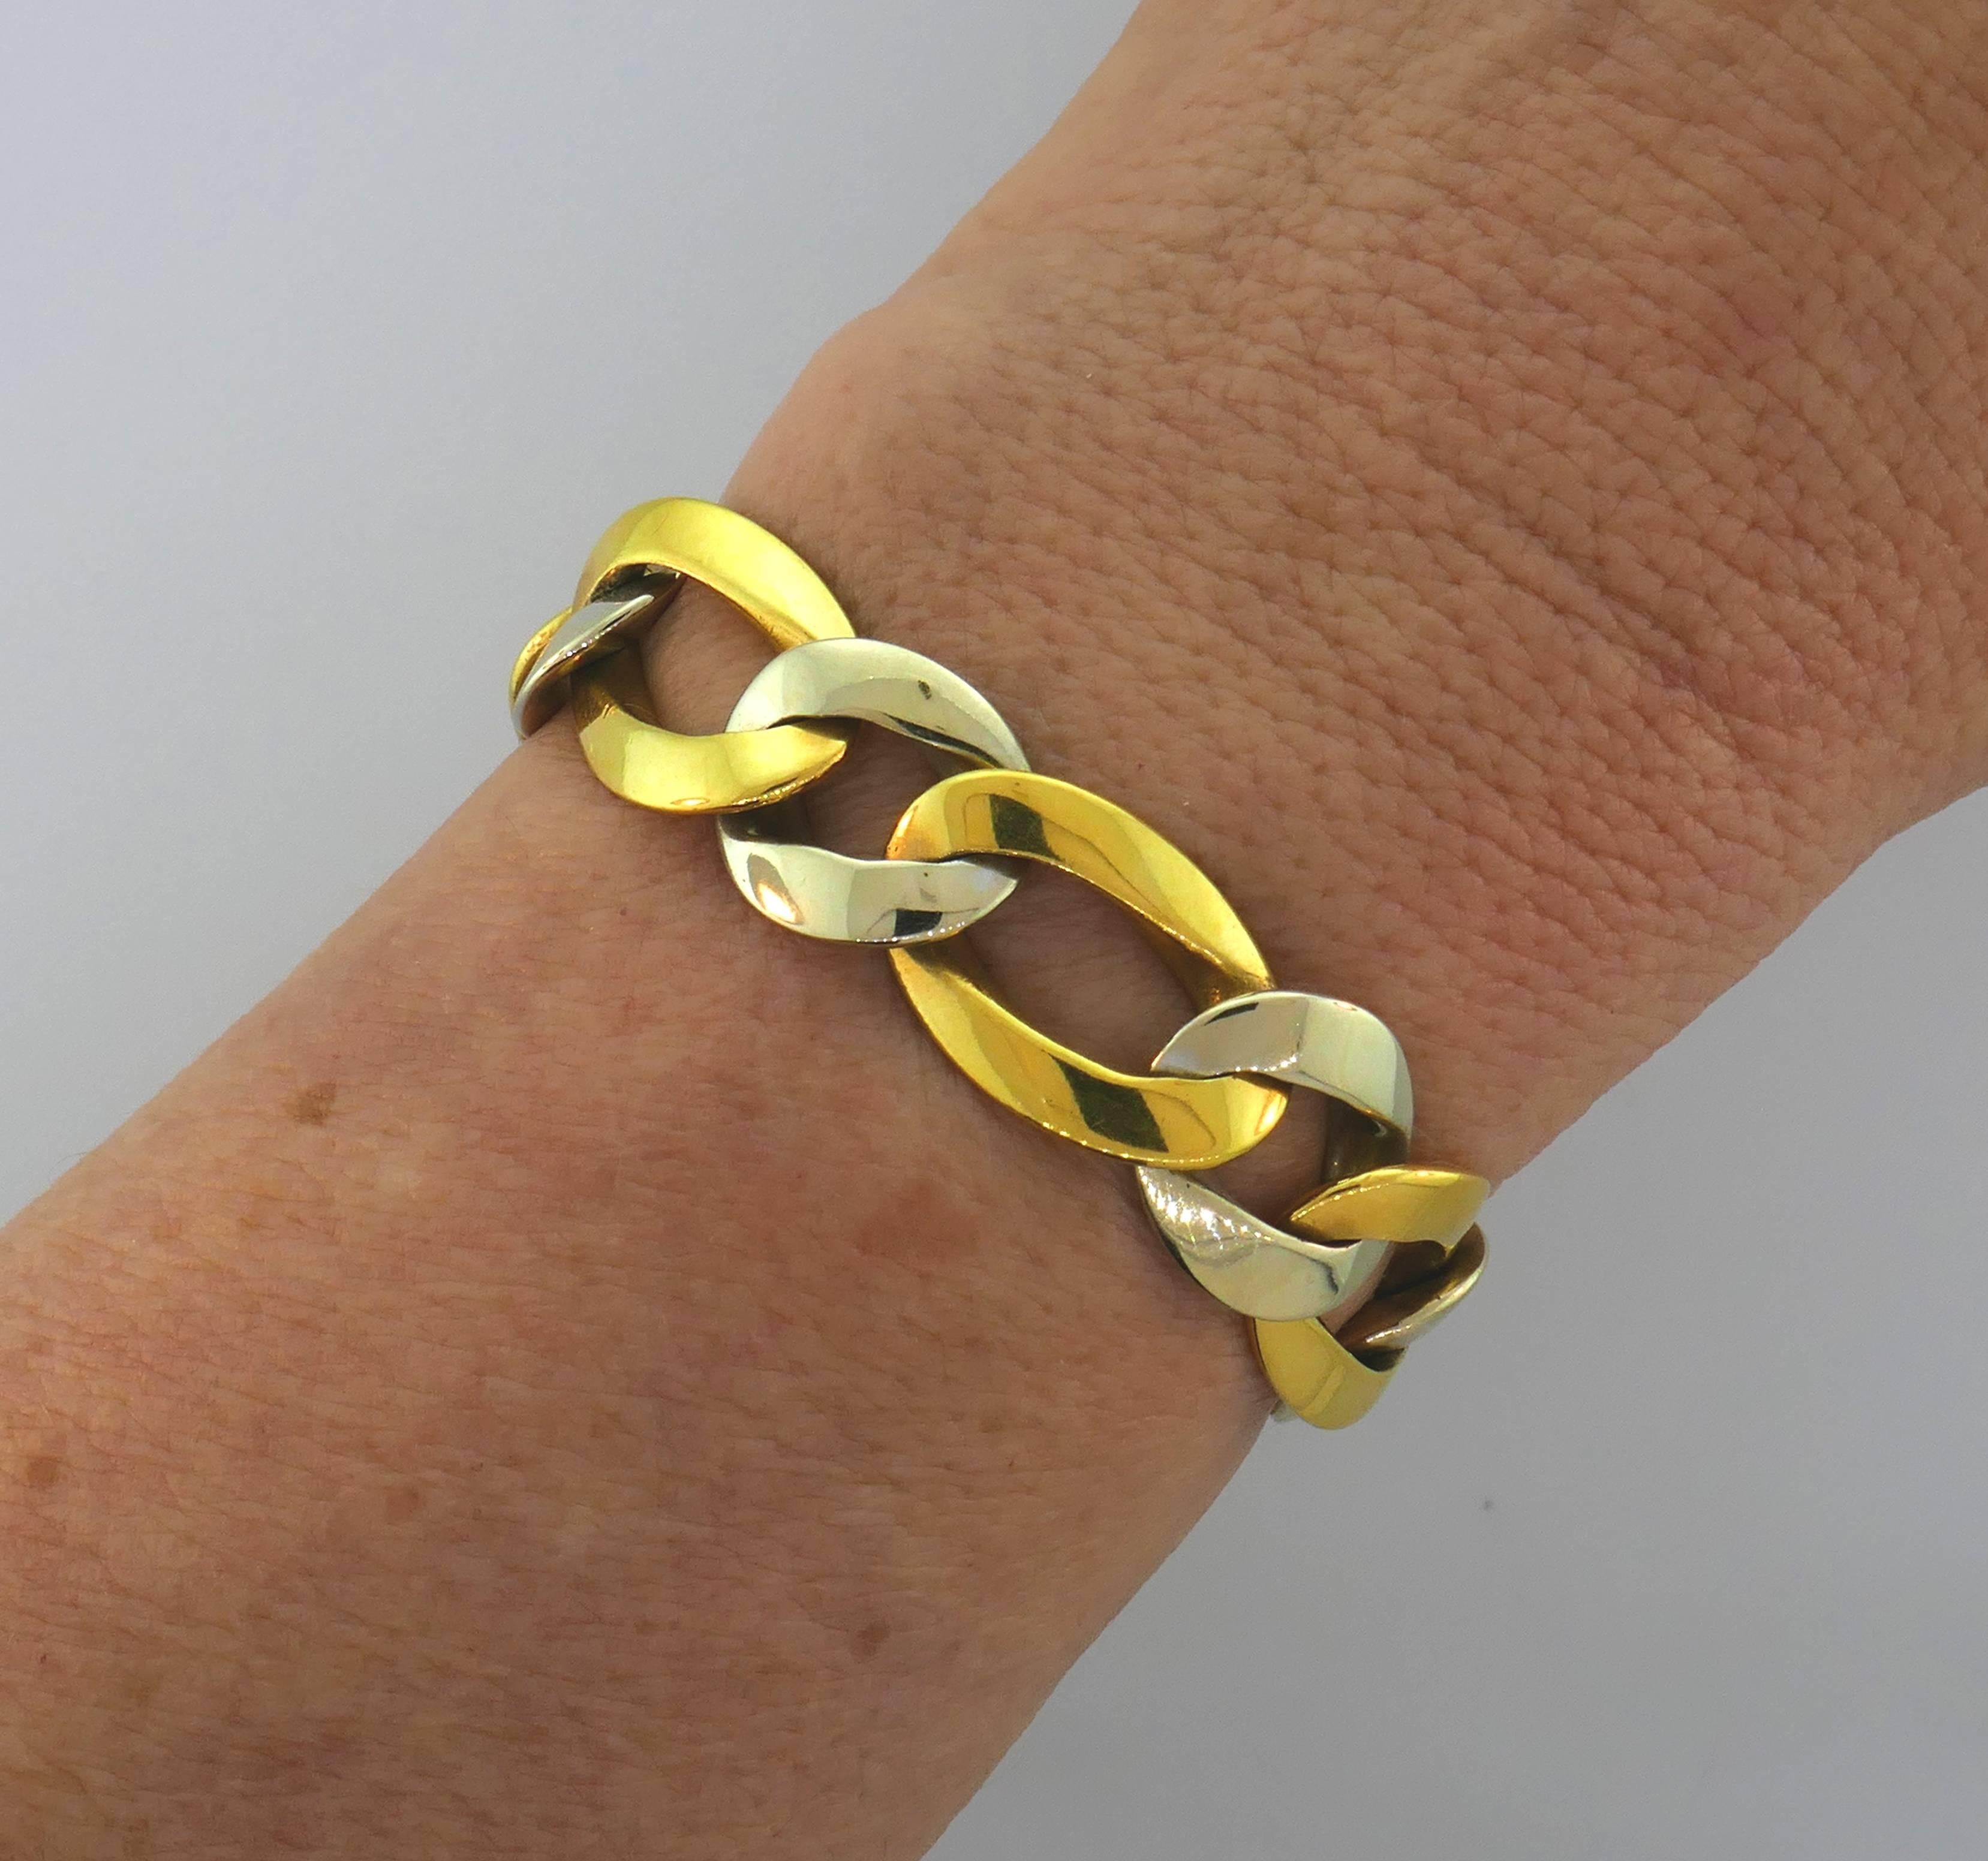 Bold yet elegant bracelet created by Pierre Sterle in France in the 1970's. Classic, timeless and wearable, it is a great addition to your jewelry collection. It can be worn separately and mixed up with your other bracelets, made of yellow and/or